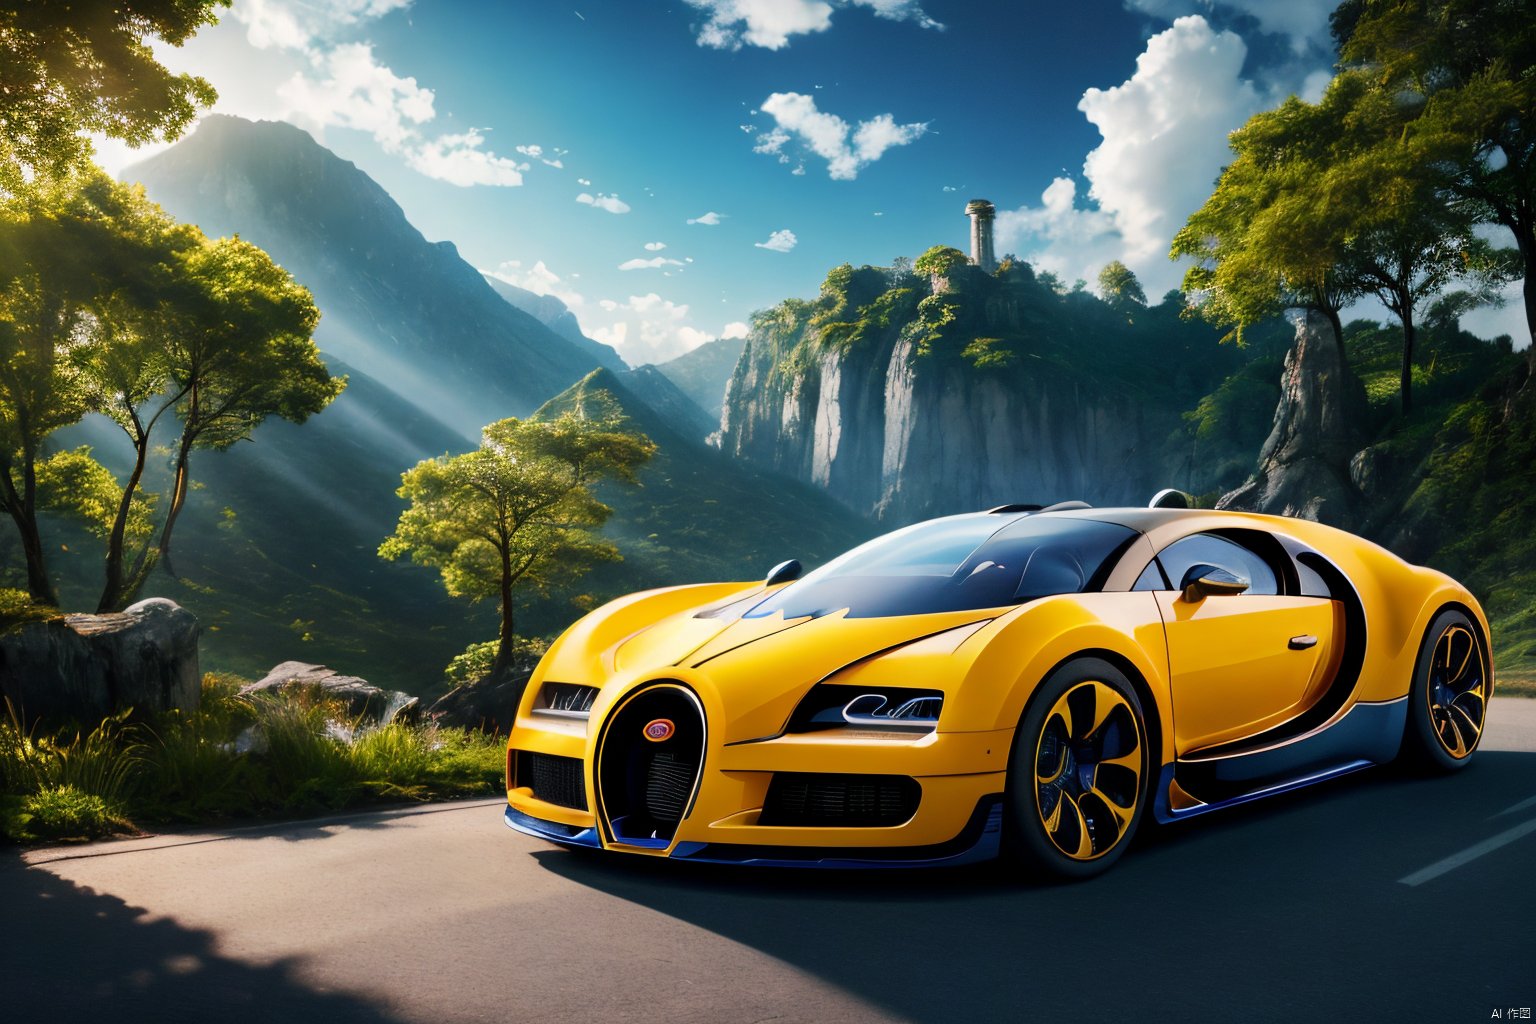  lifelike, precise, vibrant, absurdres,((bugatti concept car)) in Wonderland landscape,magical forest,BREAK,vivid colorful sky with clouds, light up the surroundings,cinematic lighting, light master